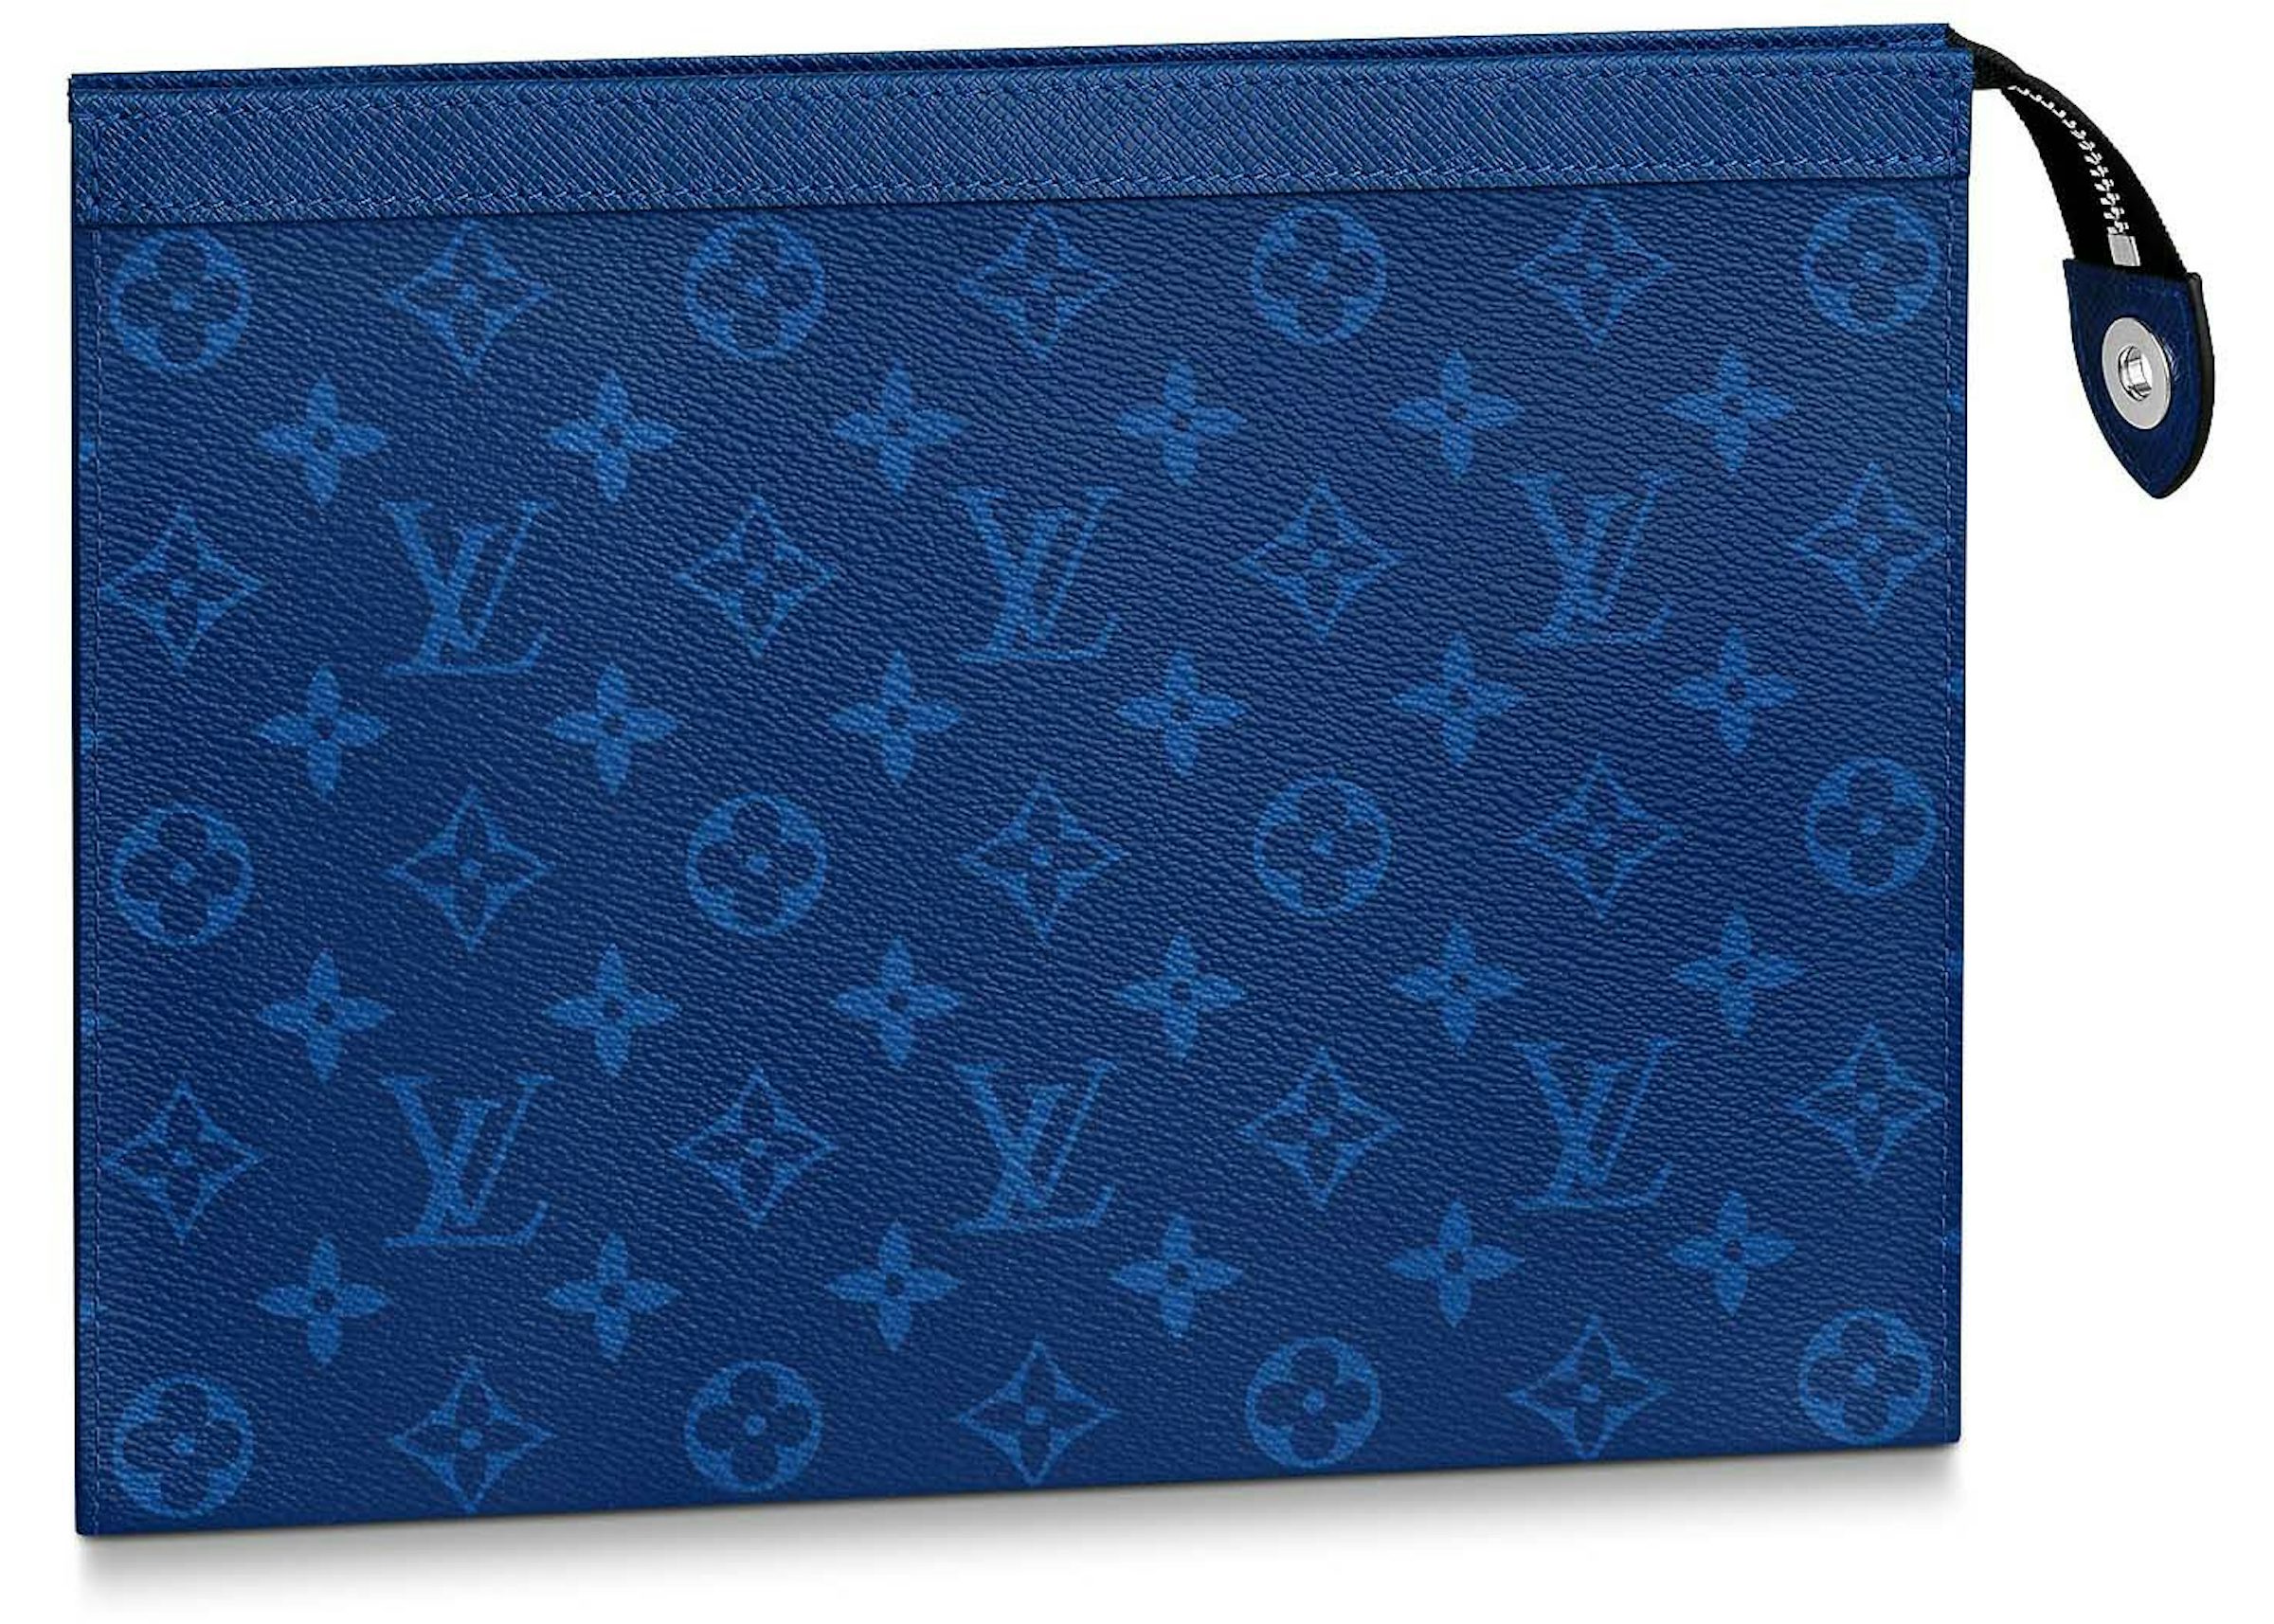 A Louis Vuitton Bag You Can't Buy in Stores: The Neverfull Pochette -  StockX News